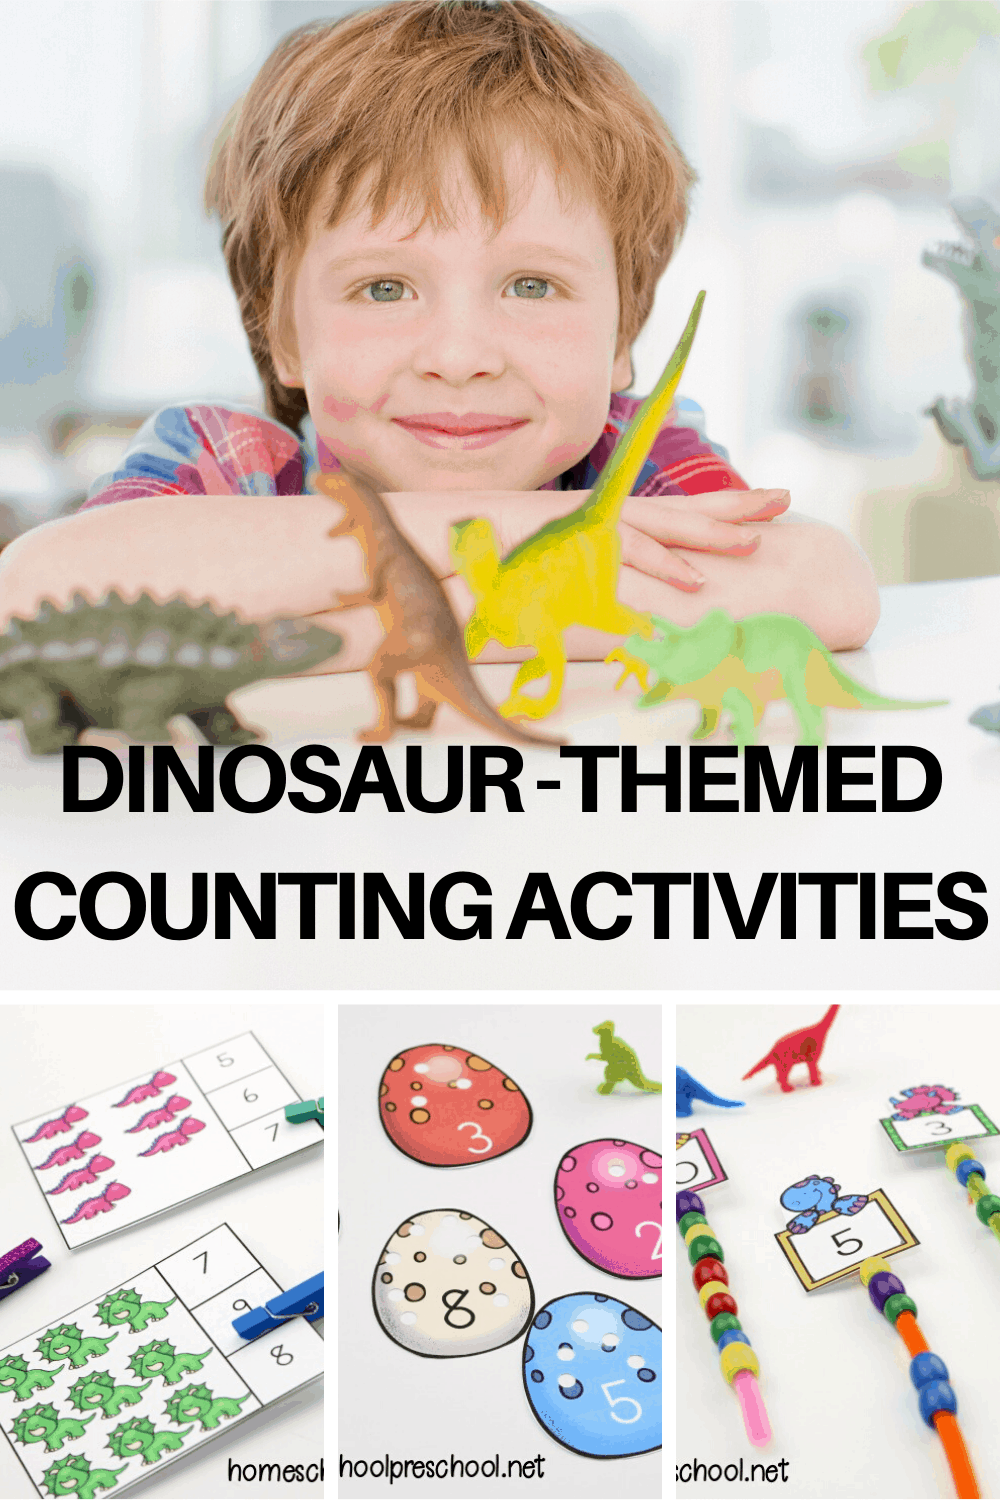 dino-count-1 Counting Books for Preschoolers